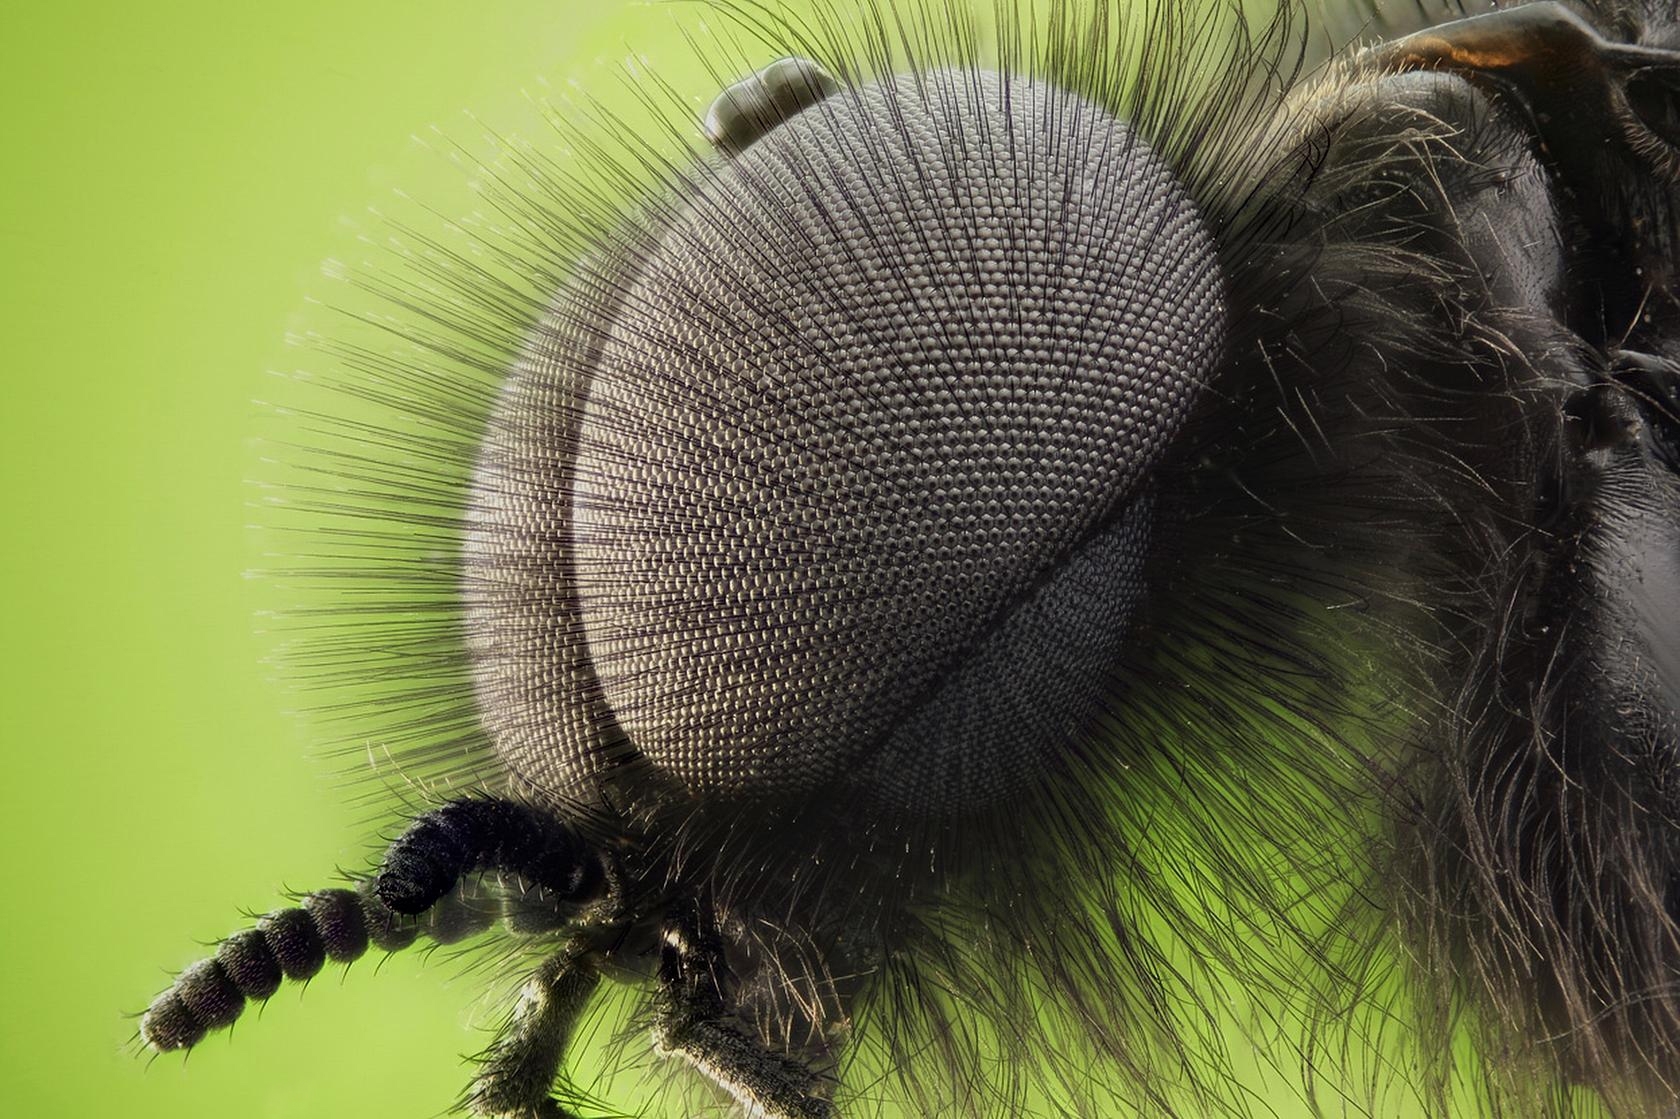 http://rozup.ir/up/1080wallpaper/Pictures/insect_eyes_fur_close_up_65842_1680x1050.jpg